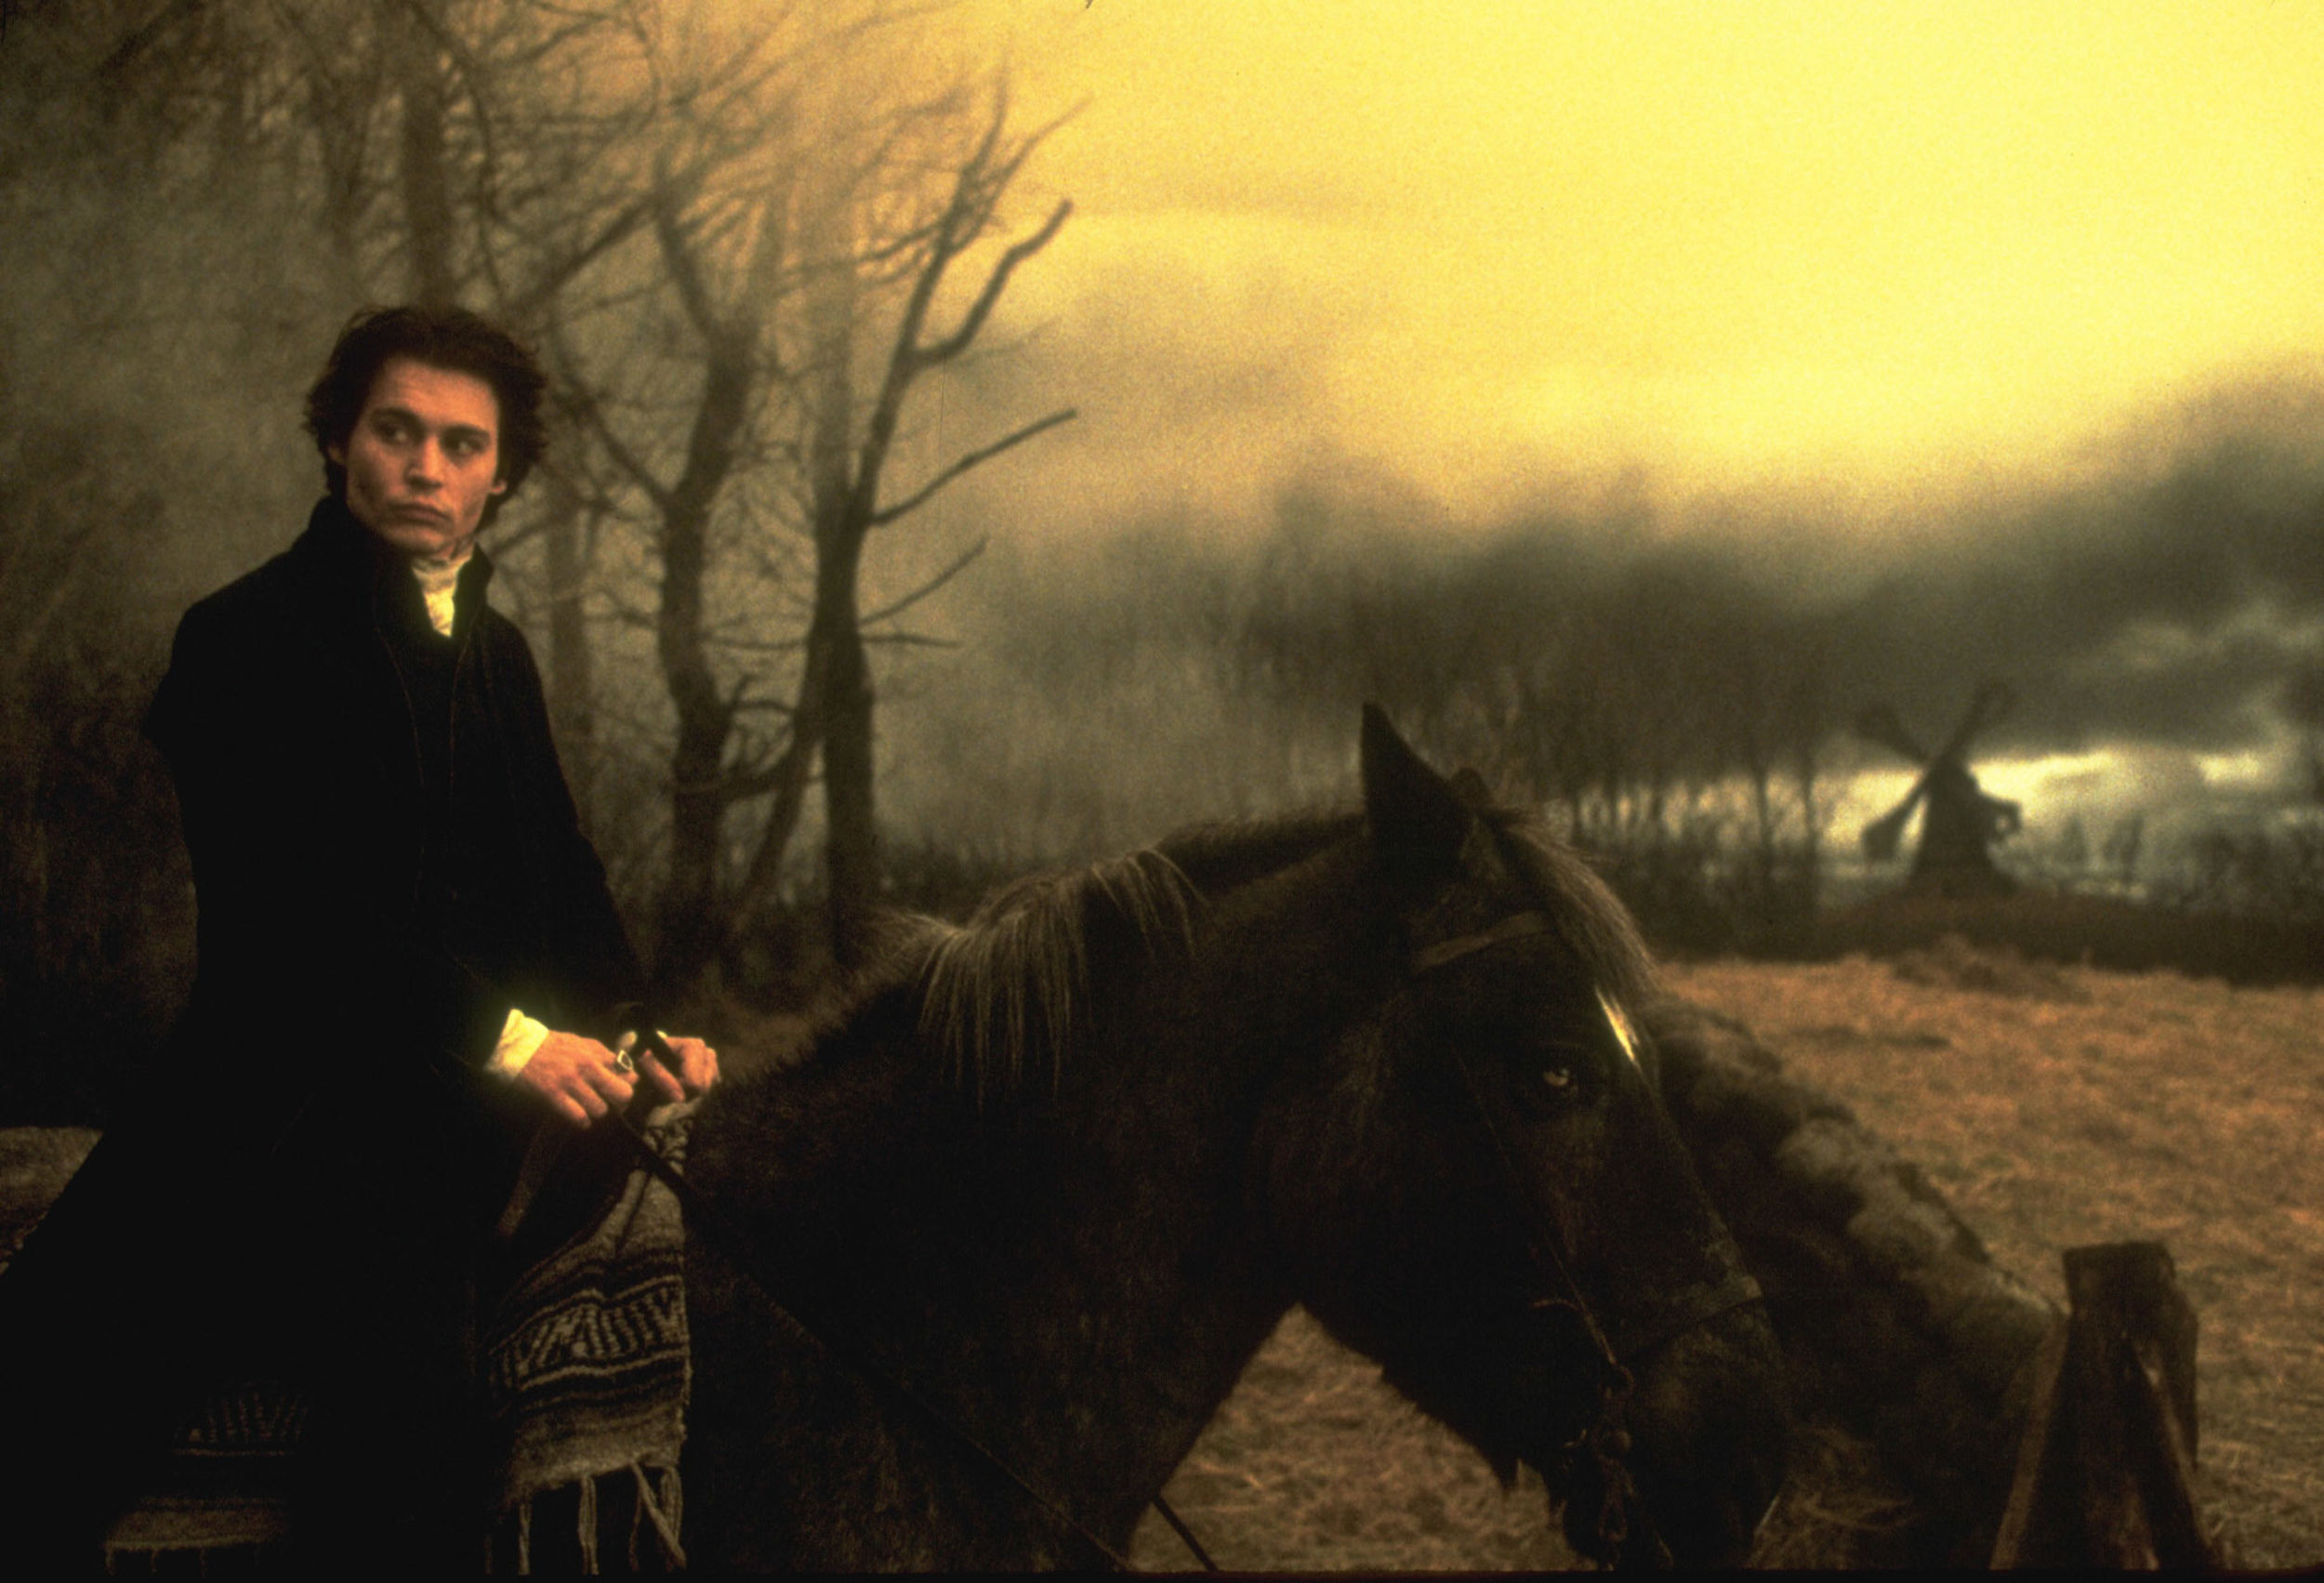 <p>Tim Burton has always had a reputation for embracing the darker and more sinister side of the fantasy tradition, and this is very much in evidence in <span><em>Sleepy Hollow</em>. </span>Though it retains the bones of Washington Irving’s original story about Ichabod Crane, it takes the story in some new and unexpected directions. It is, indeed, a far darker version of the story than audiences had seen before, and it makes for perfect Halloween viewing. It also features some strong performances from its cast, including Johnny Depp (always a favorite muse of Burton’s), Christina Ricci, and Miranda Richardson.</p><p><a href='https://www.msn.com/en-us/community/channel/vid-cj9pqbr0vn9in2b6ddcd8sfgpfq6x6utp44fssrv6mc2gtybw0us'>Follow us on MSN to see more of our exclusive entertainment content.</a></p>